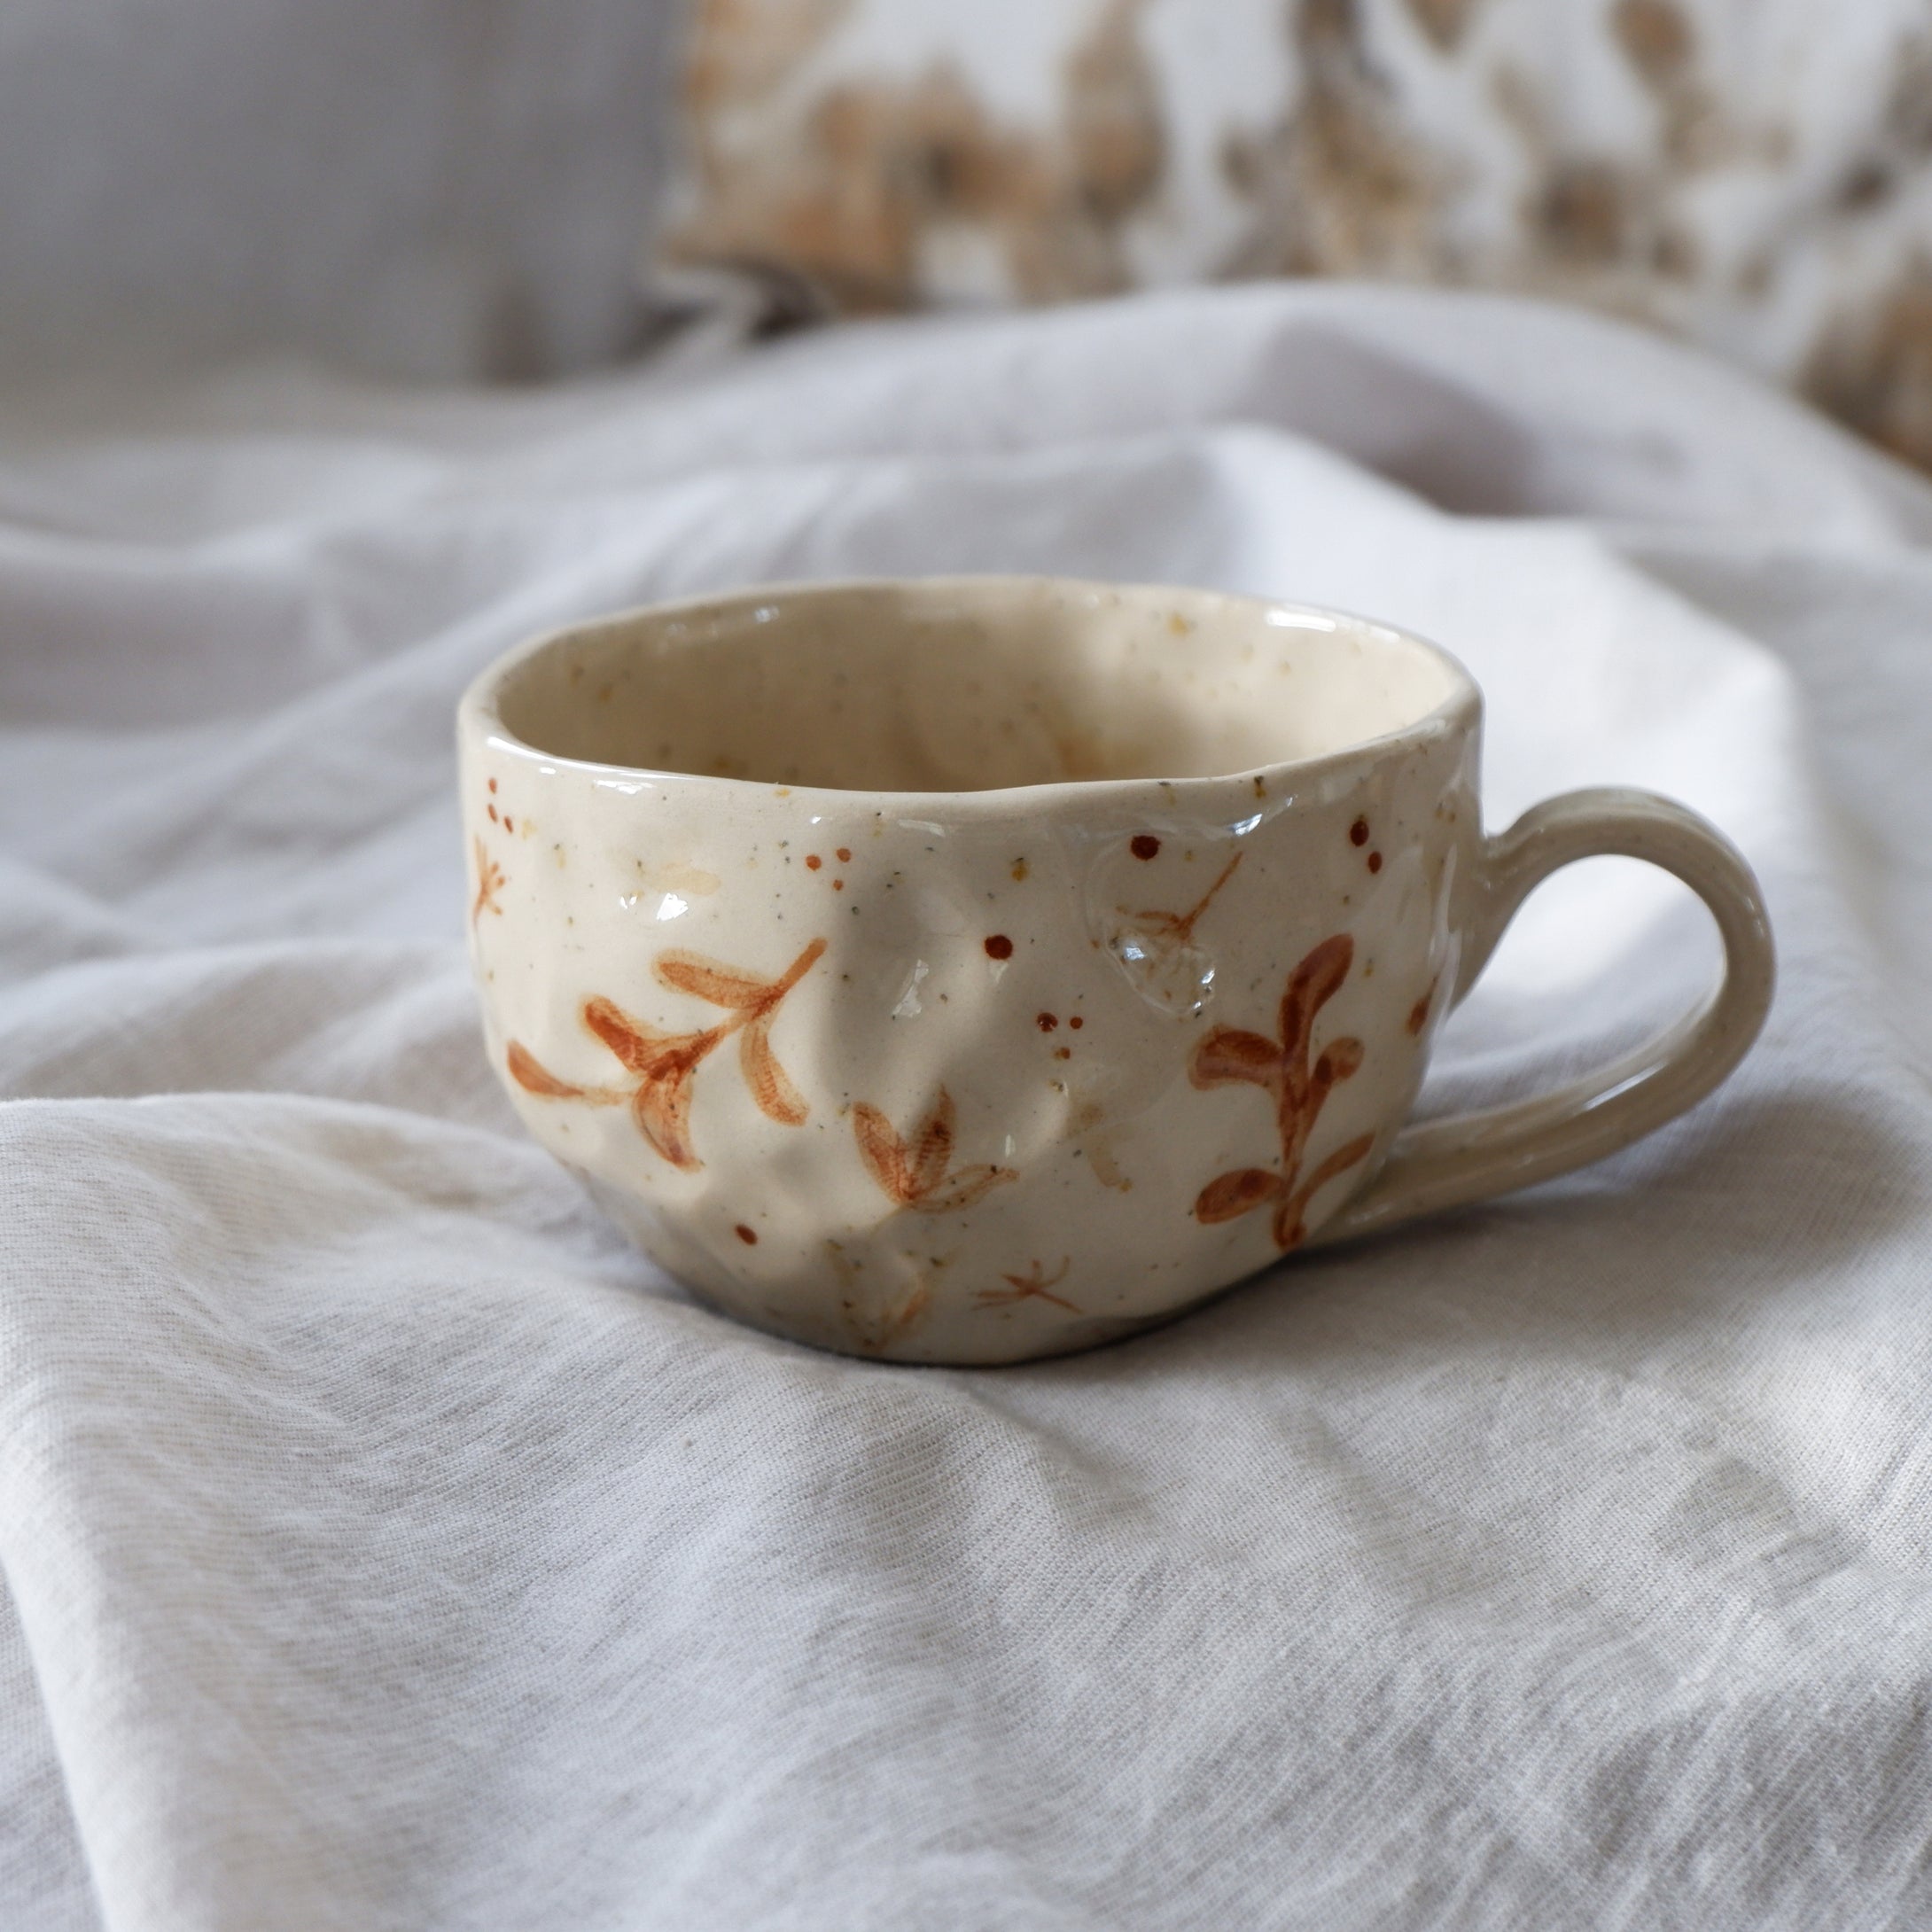 Speckled beige mug with hand-painted brown details